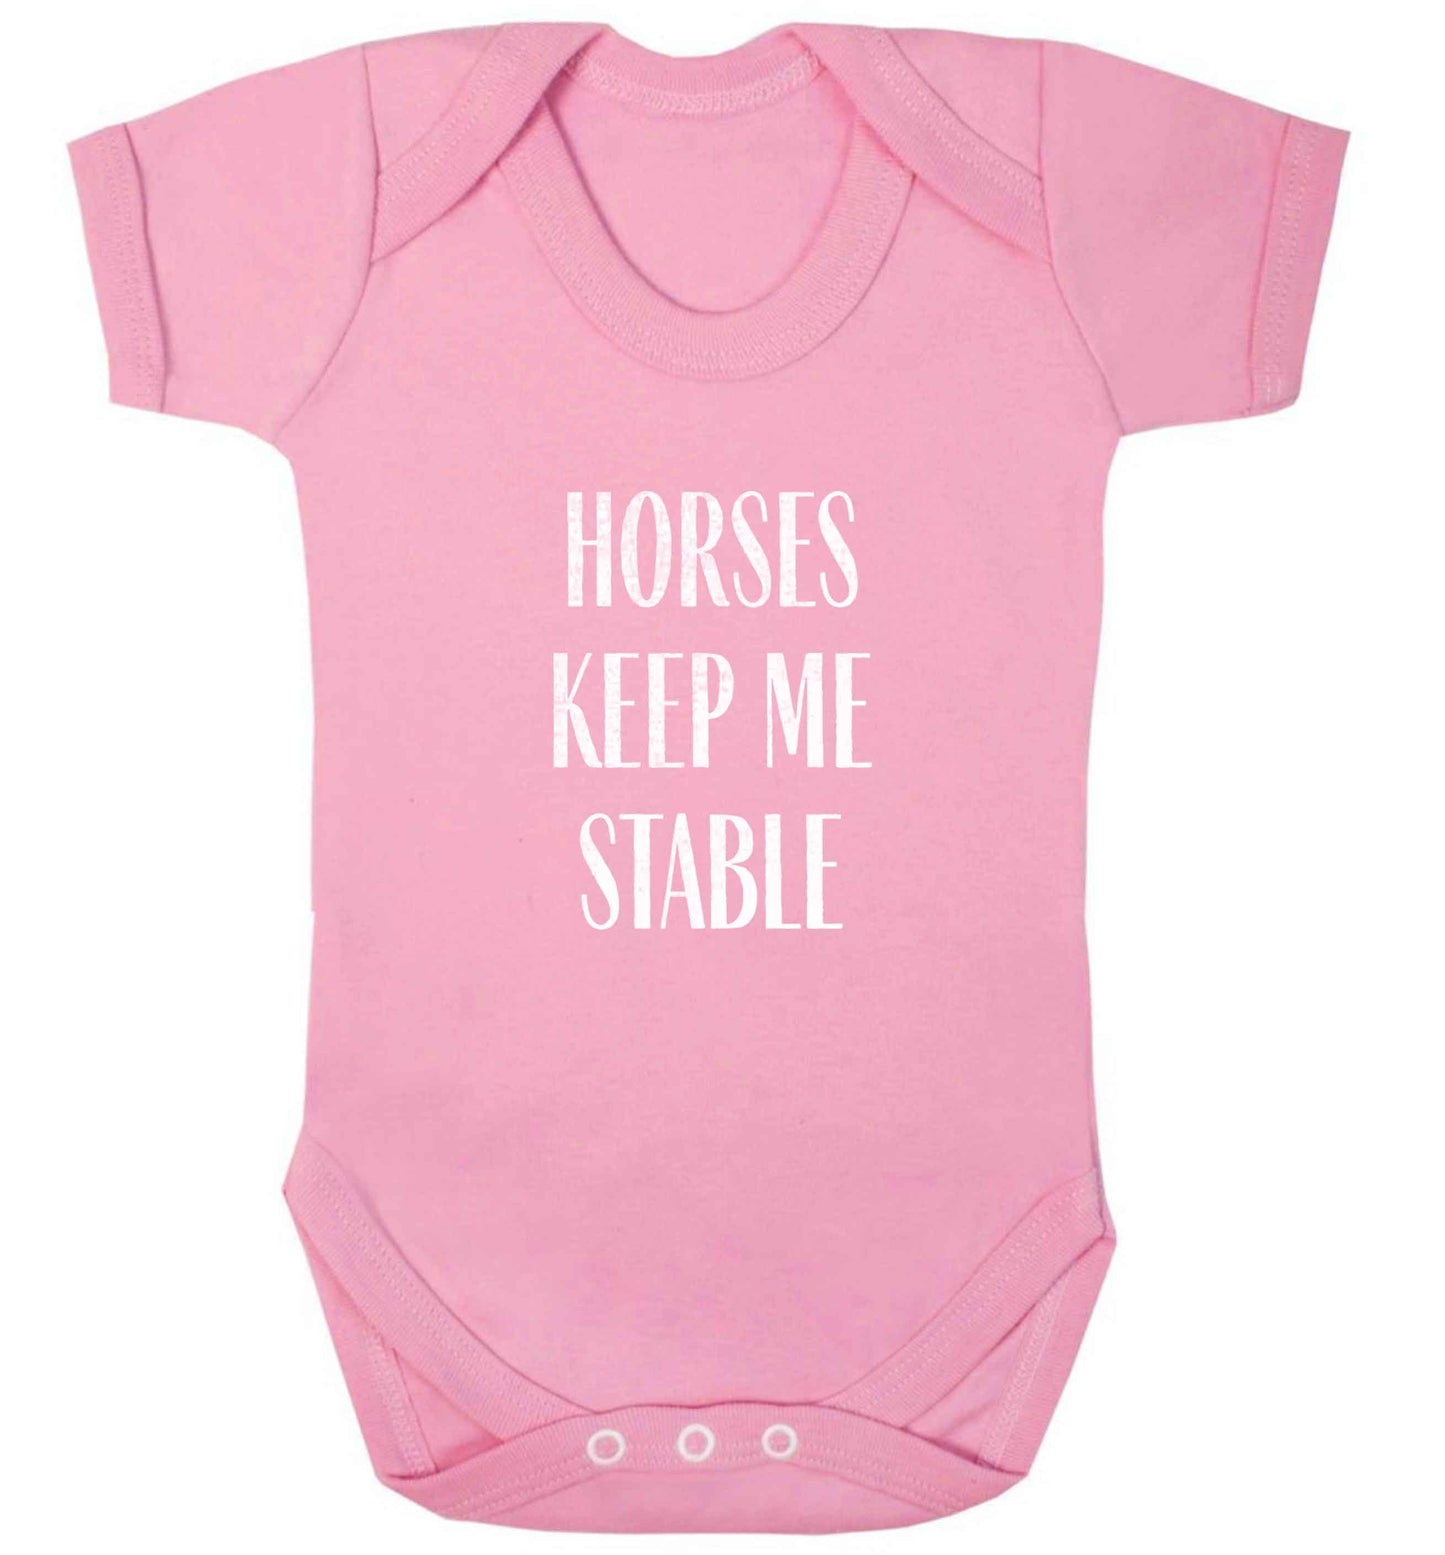 Horses keep me stable baby vest pale pink 18-24 months